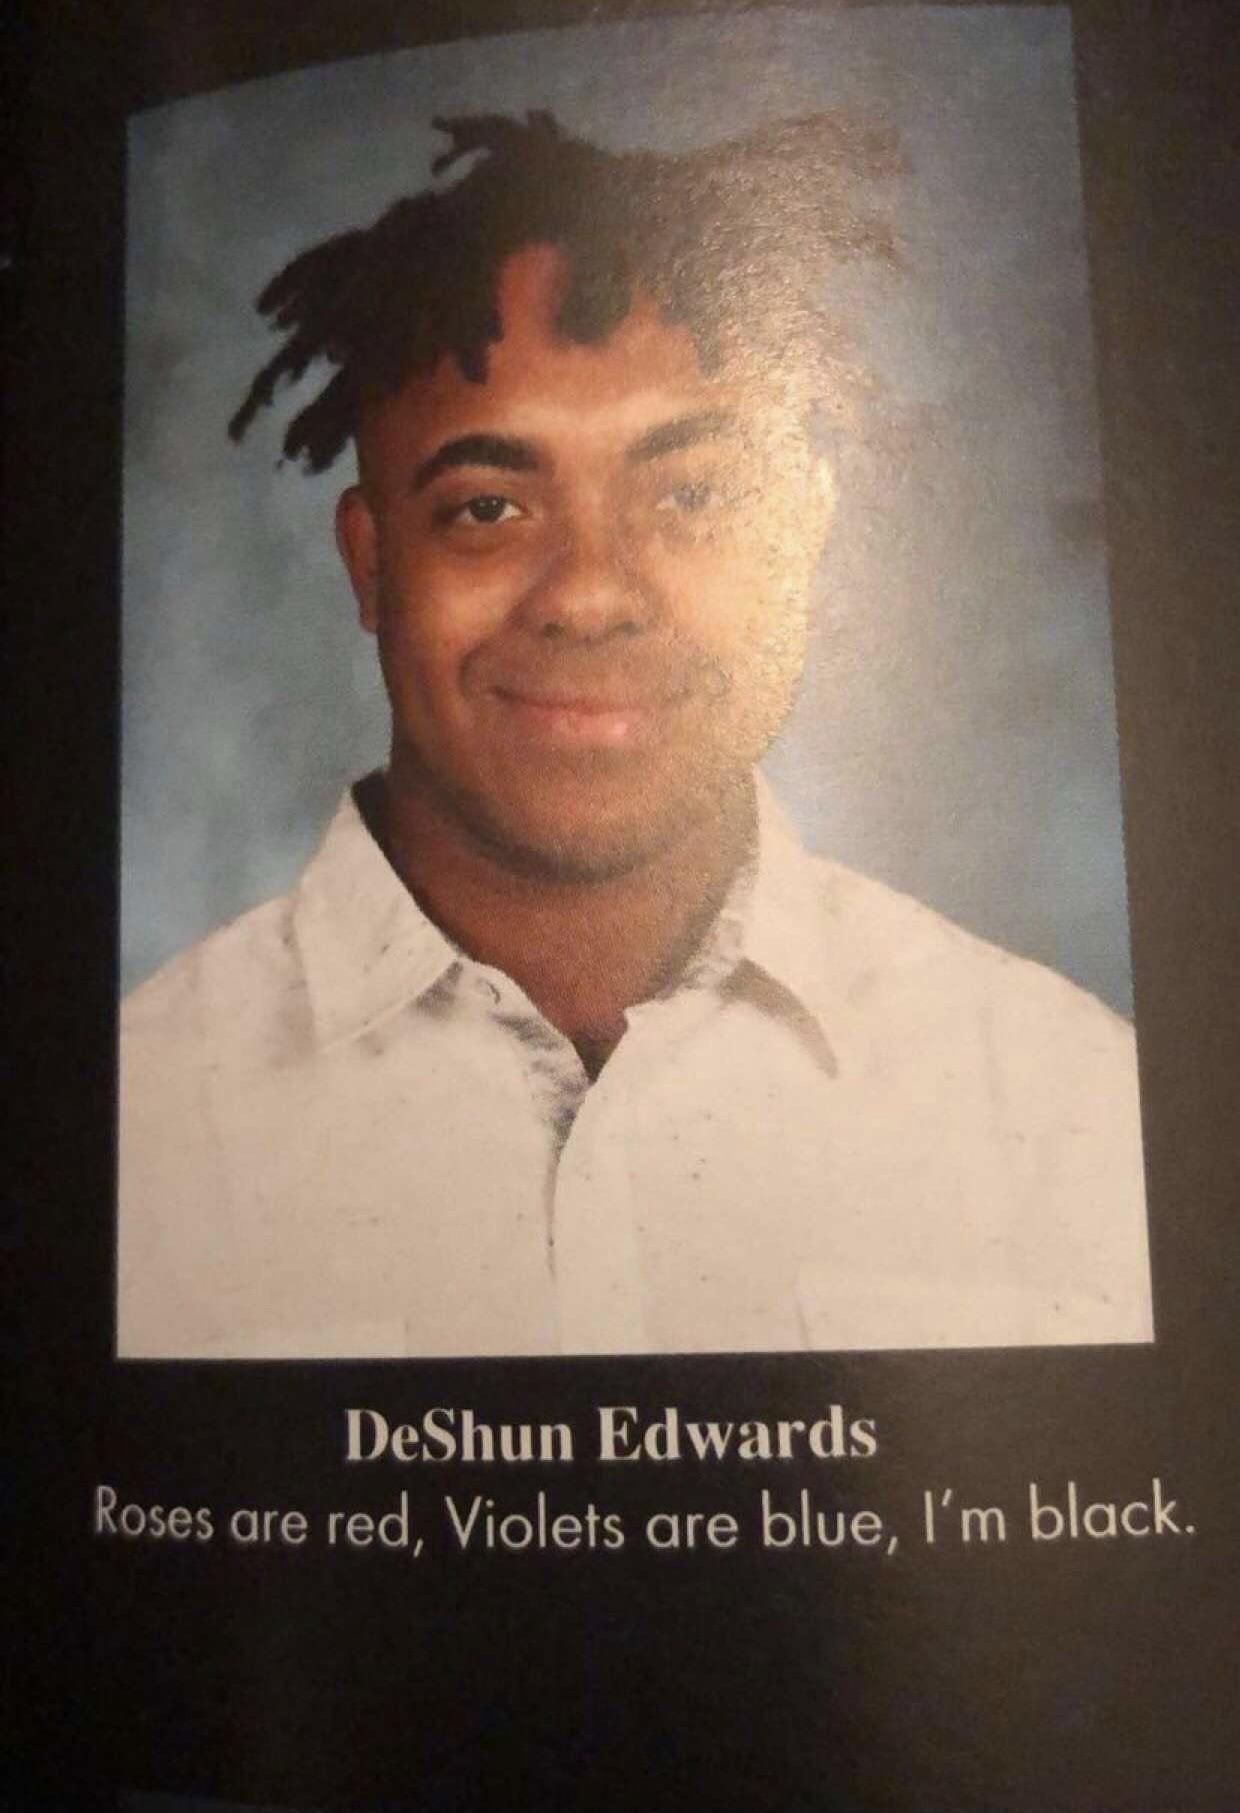 My favorite senior quote from my yearbook